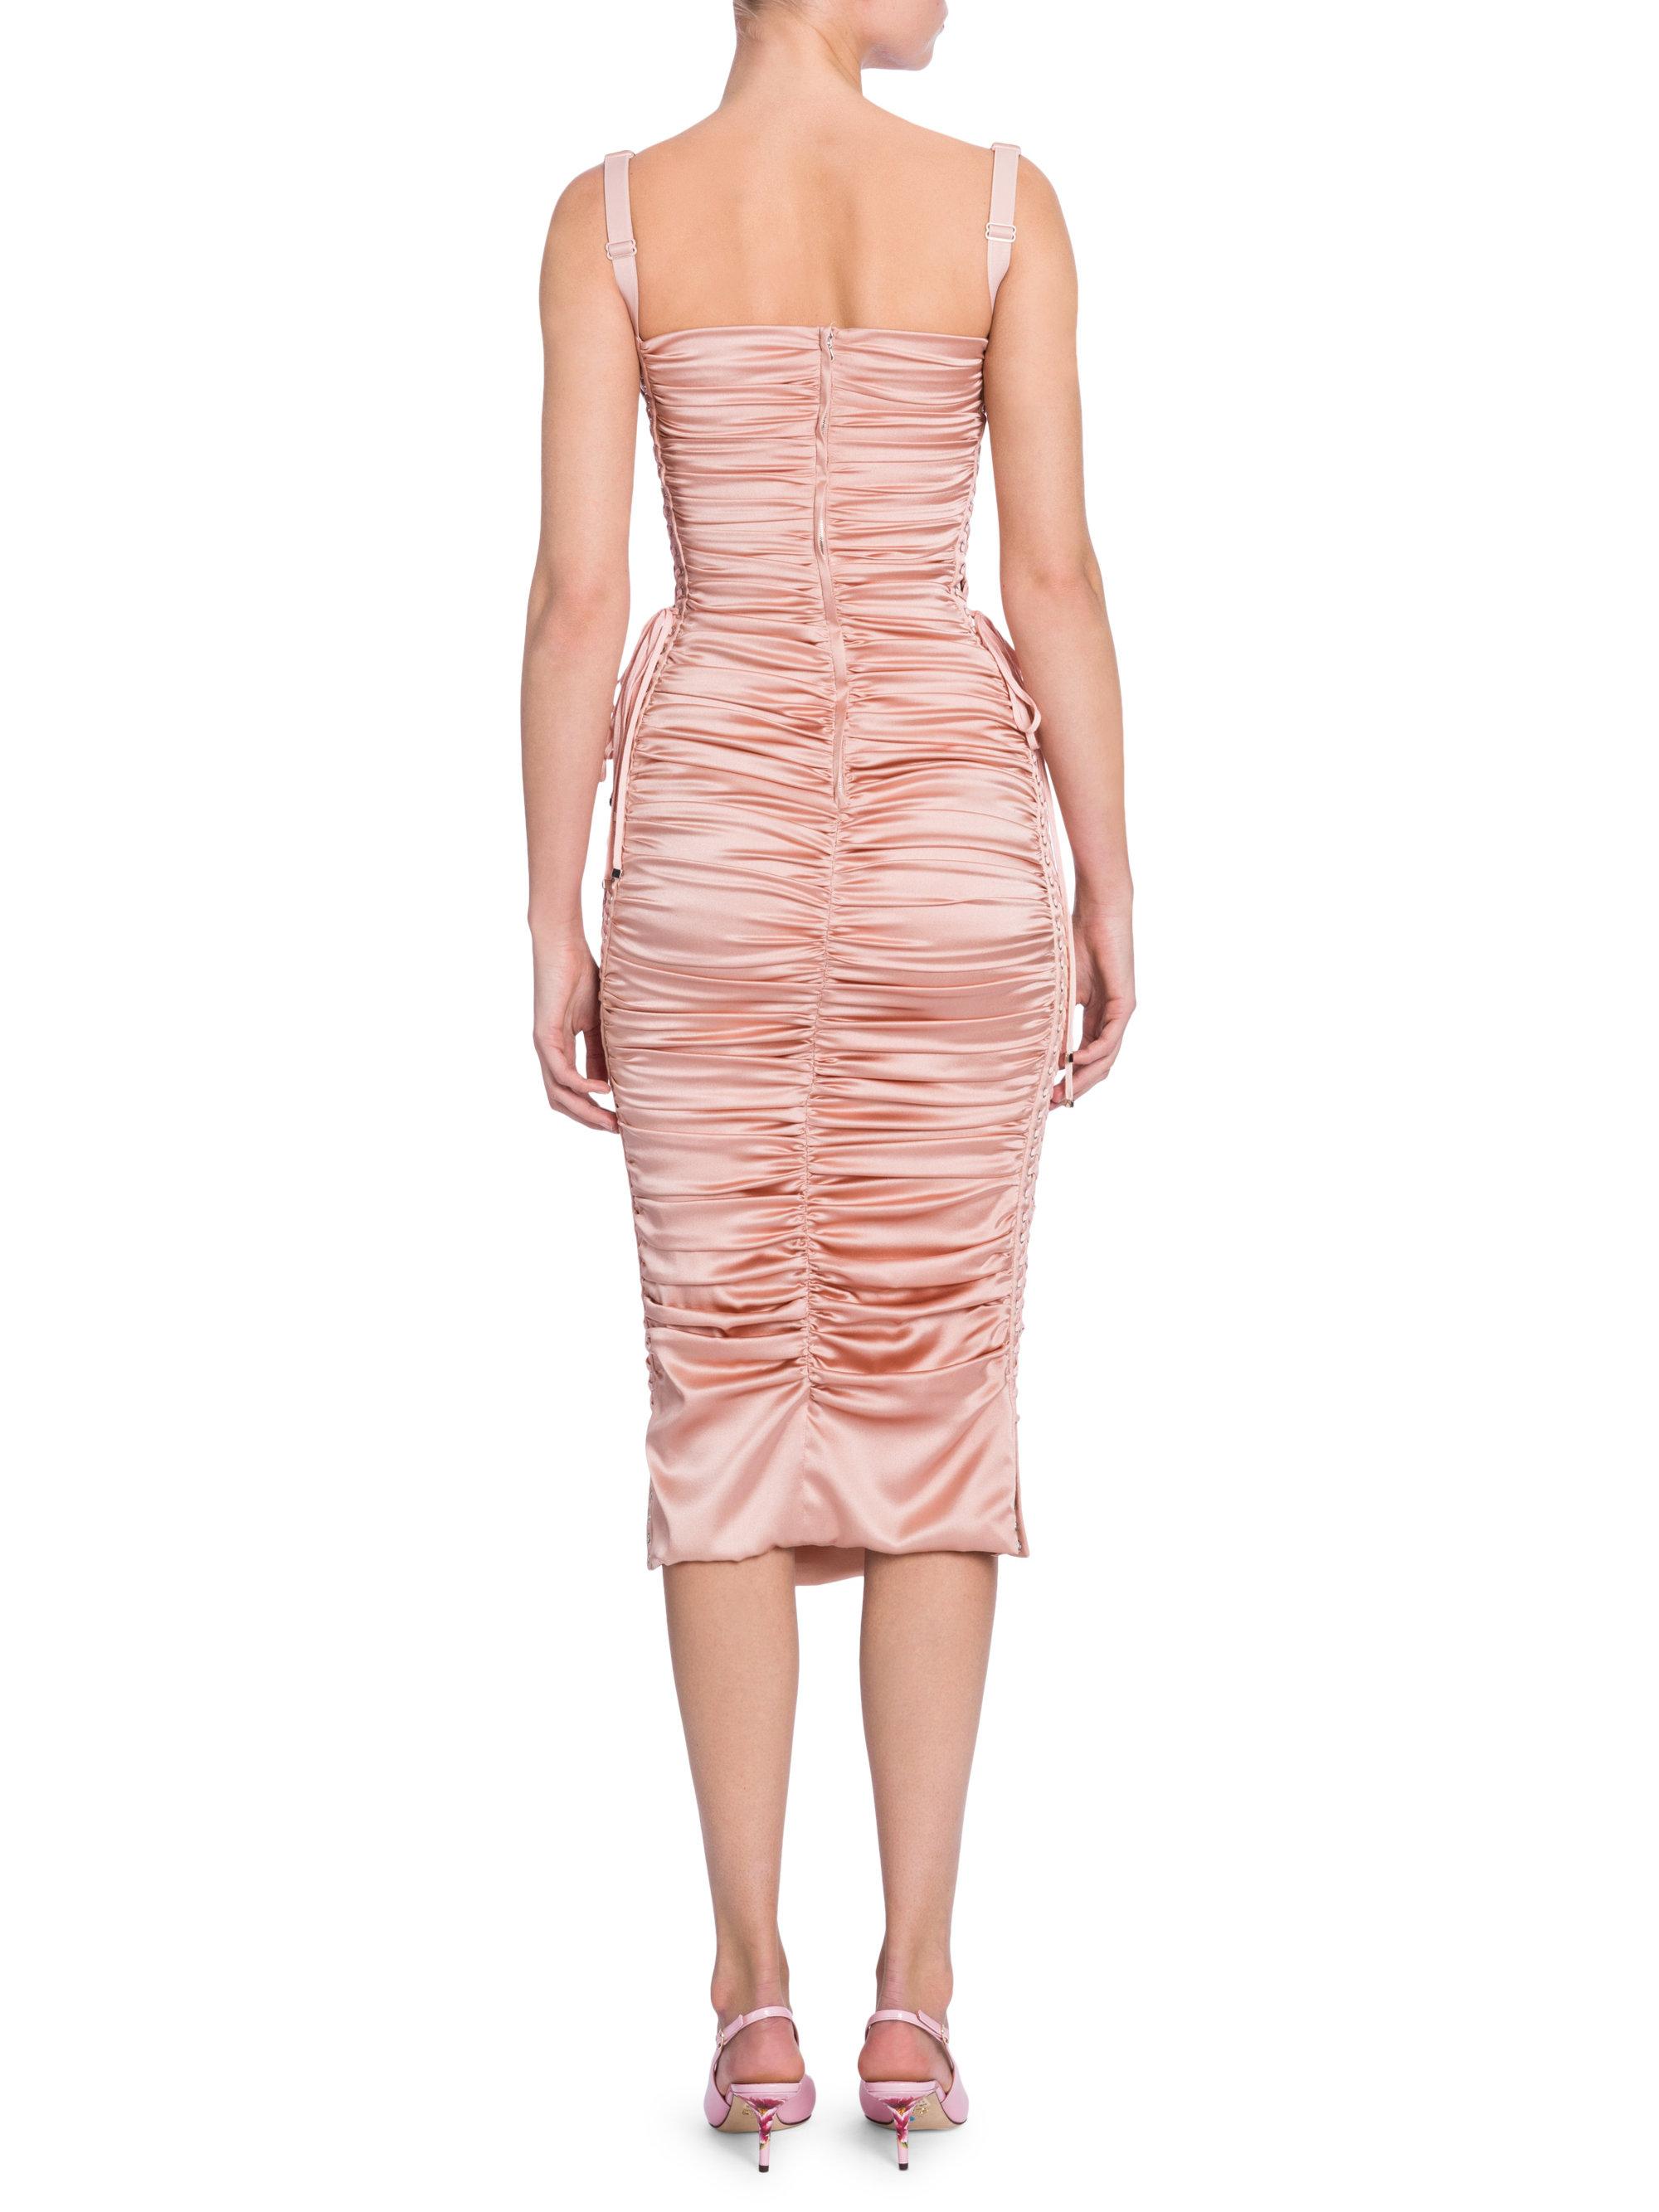 Dolce & Gabbana Ruched Satin Lace-up Dress in Pink | Lyst